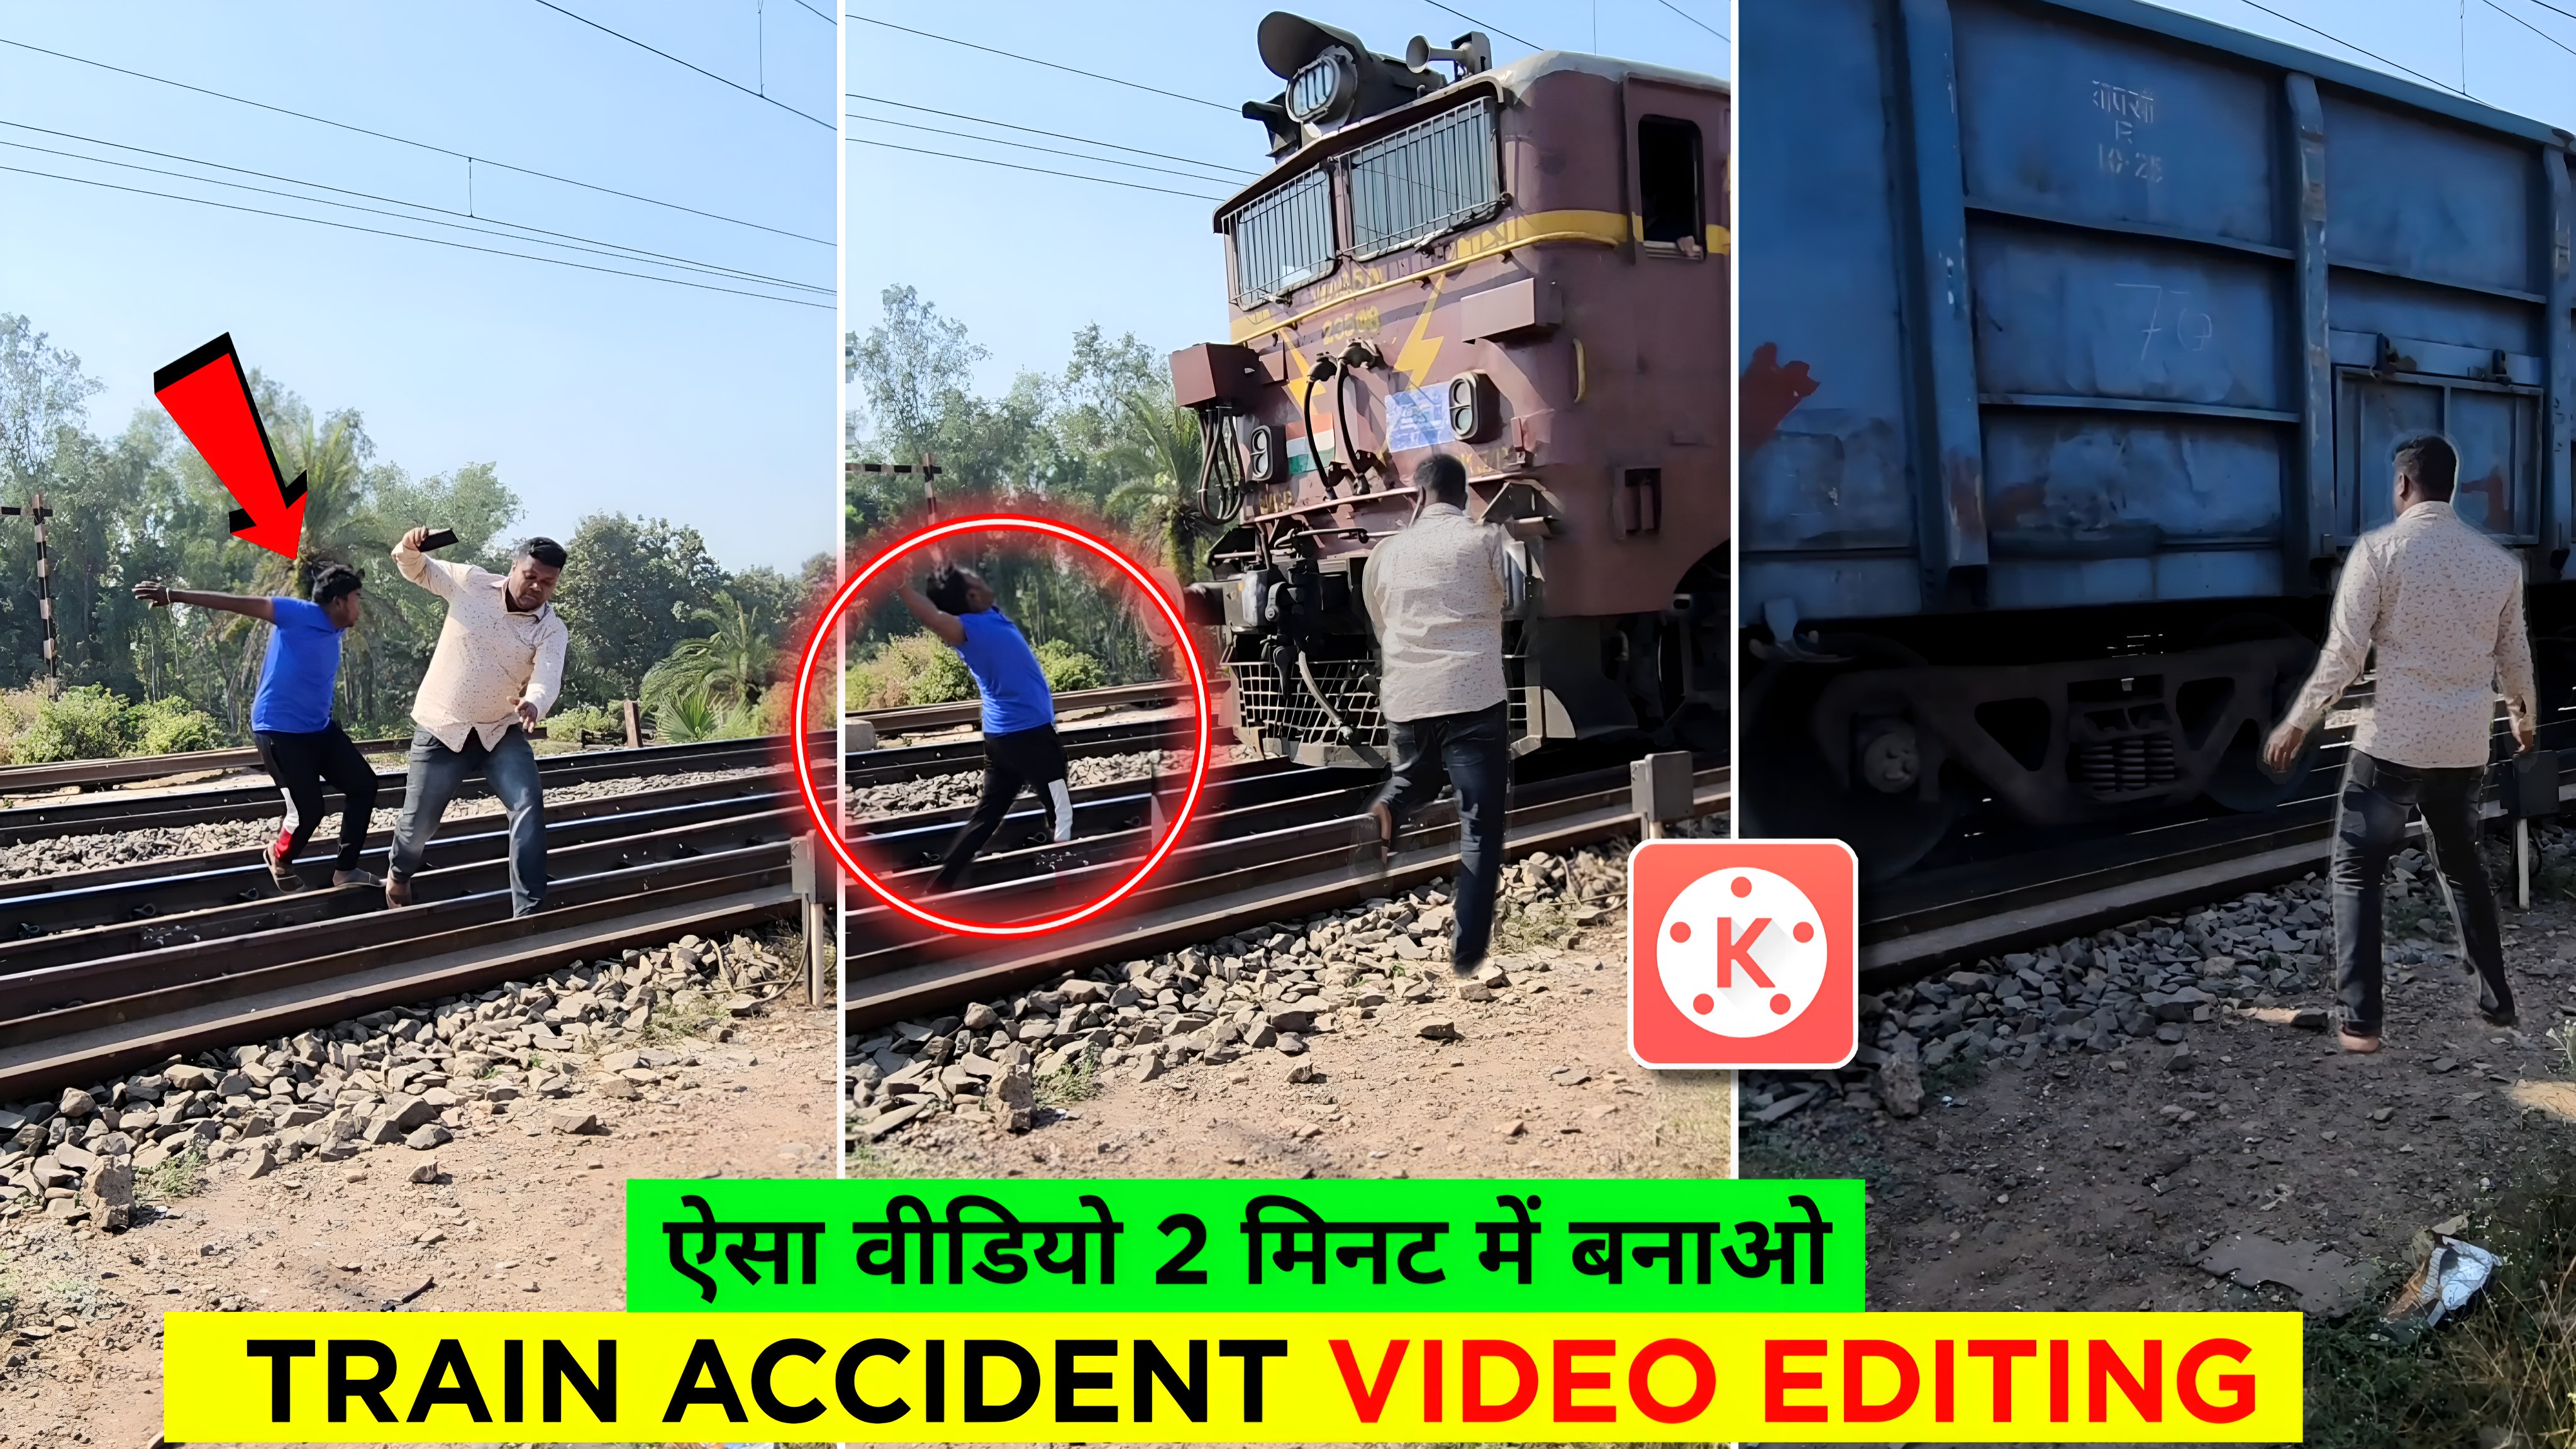 How To Make Train Accident Video || Train Accident Video Editing || Kinemaster Video Editing